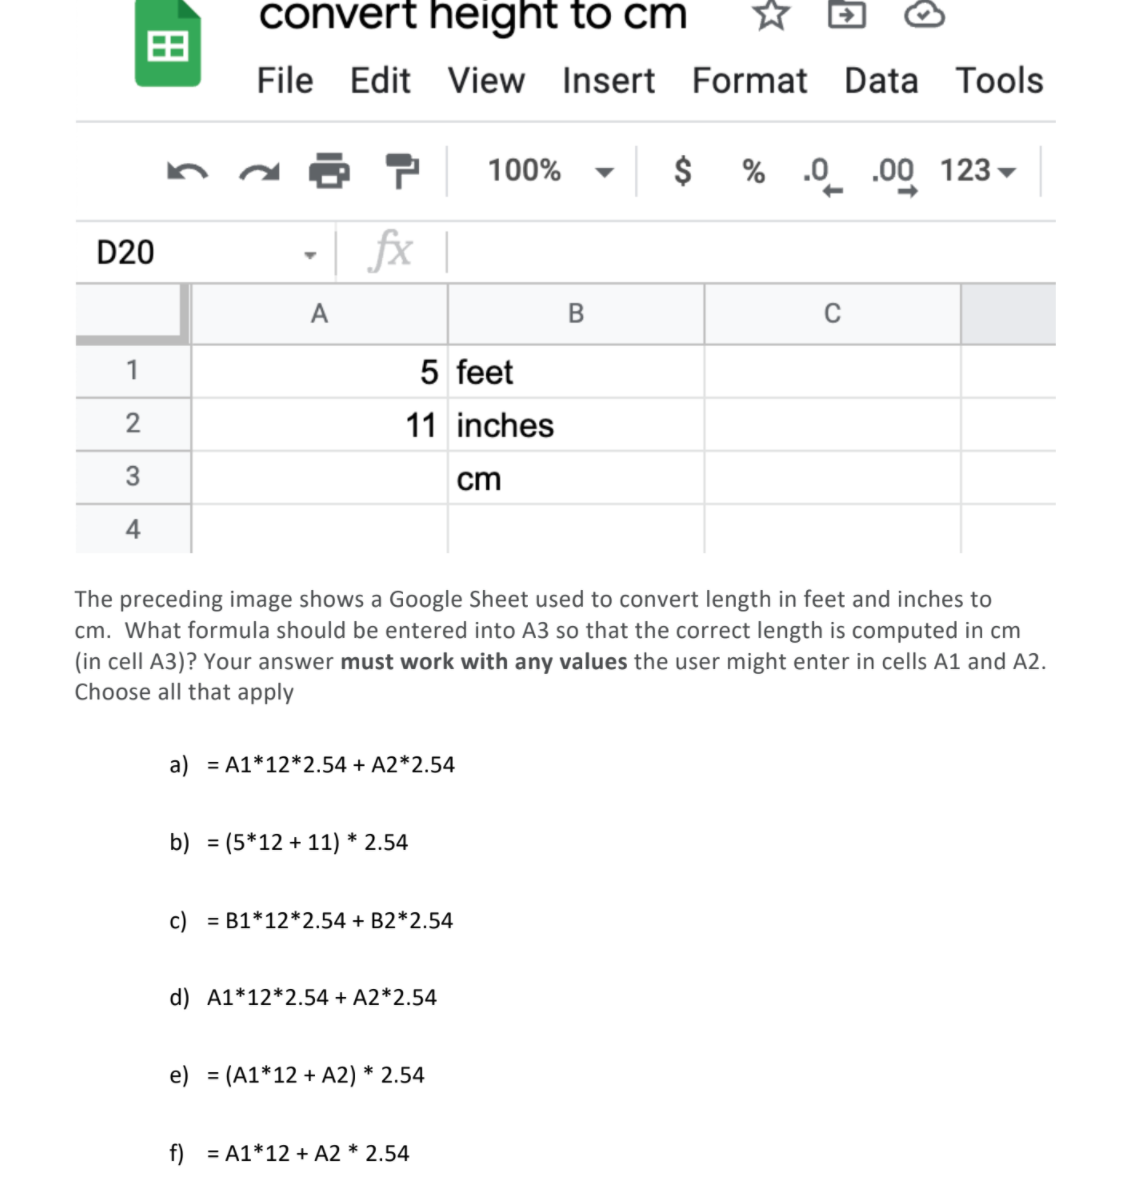 convert height to cm
File Edit View Insert Format Data Tools
100%
% .0 .00 123
D20
fx |
A
1
5 feet
2
11 inches
3
cm
4
The preceding image shows a Google Sheet used to convert length in feet and inches to
cm. What formula should be entered into A3 so that the correct length is computed in cm
(in cell A3)? Your answer must work with any values the user might enter in cells A1 and A2.
Choose all that apply
a) = A1*12*2.54 + A2*2.54
b) = (5*12 + 11) * 2.54
%3D
c) = B1*12*2.54 + B2*2.54
d) A1*12*2.54 + A2*2.54
e) = (A1*12 + A2) * 2.54
f) = A1*12 + A2 * 2.54
%24
田
